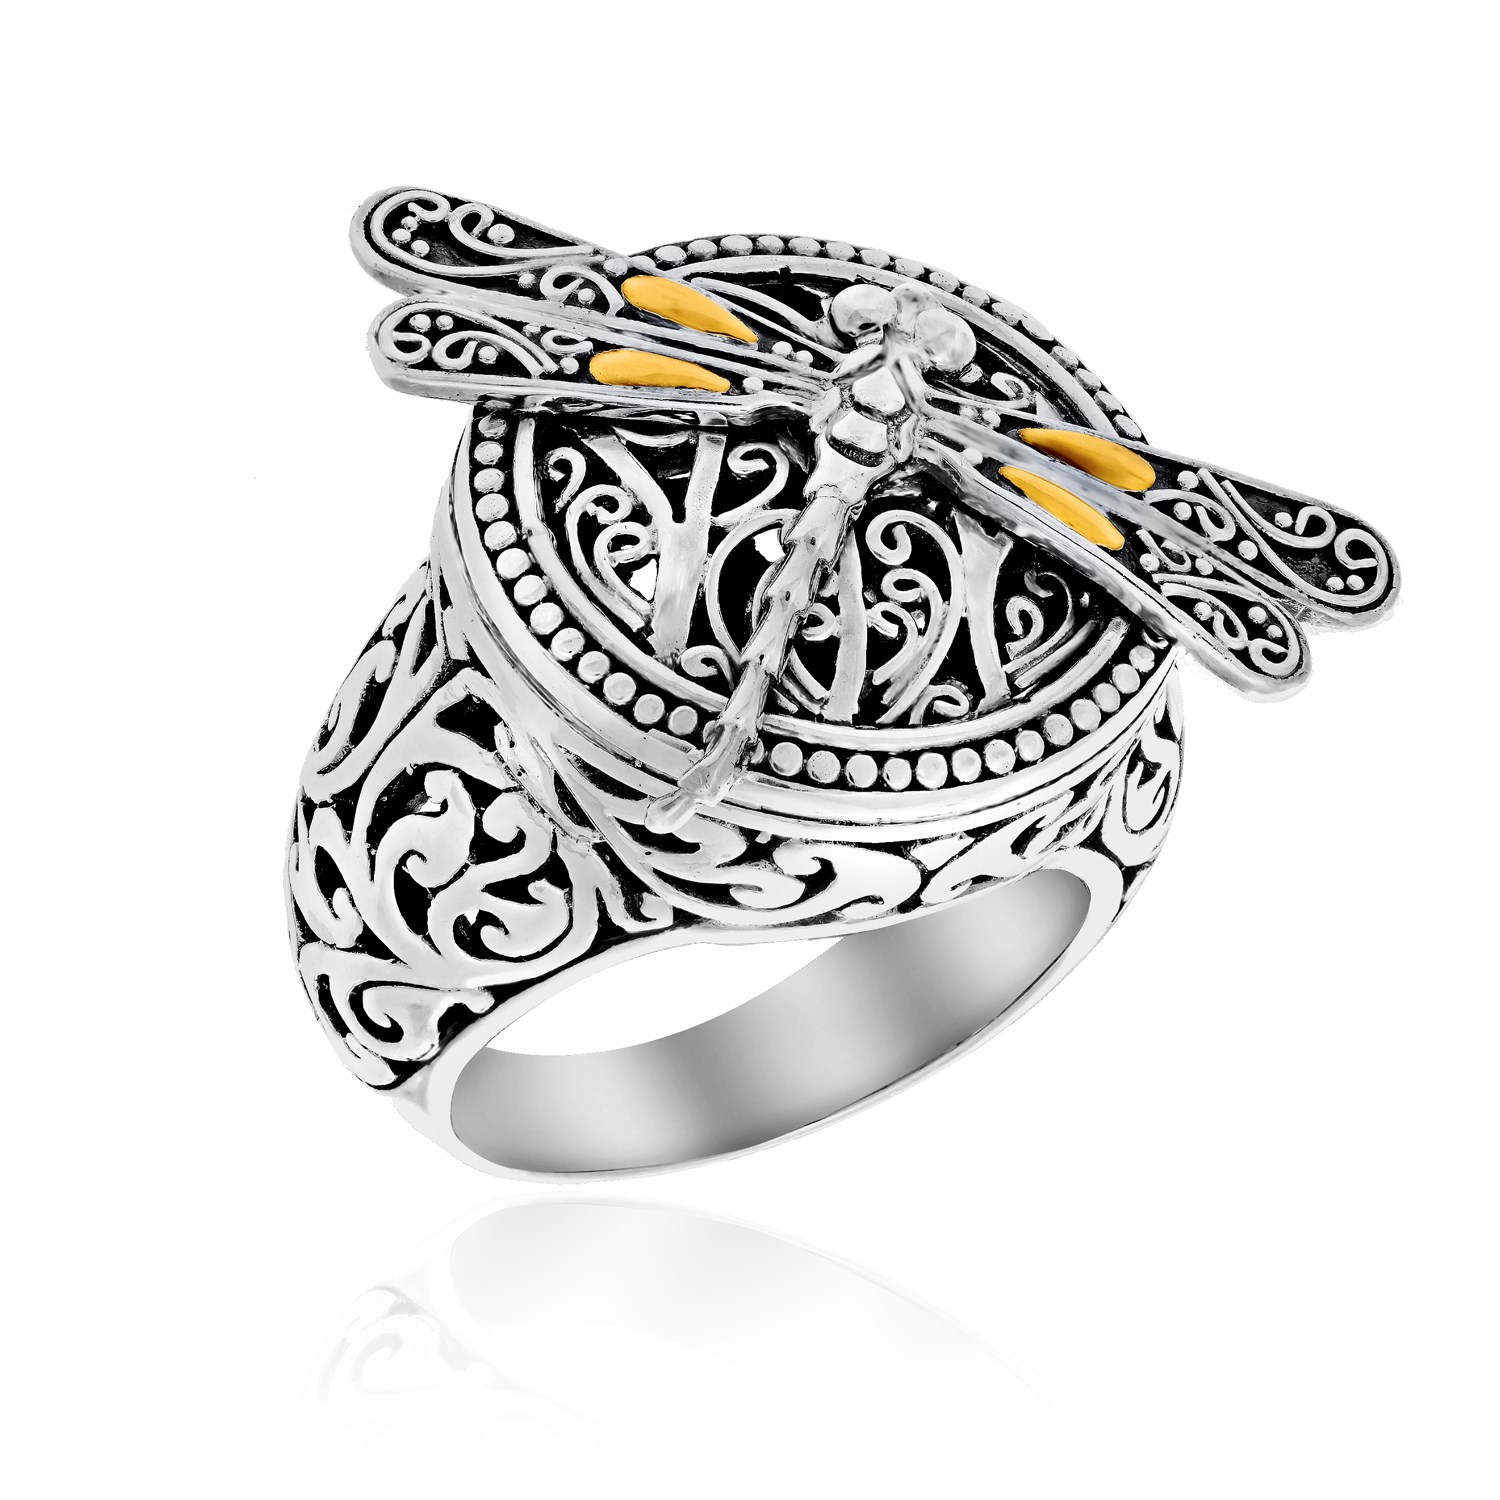 Sterling Silver Toe Ring. Spiral Coil Plain Toe Ring. (STR003) - Abhika  Jewels